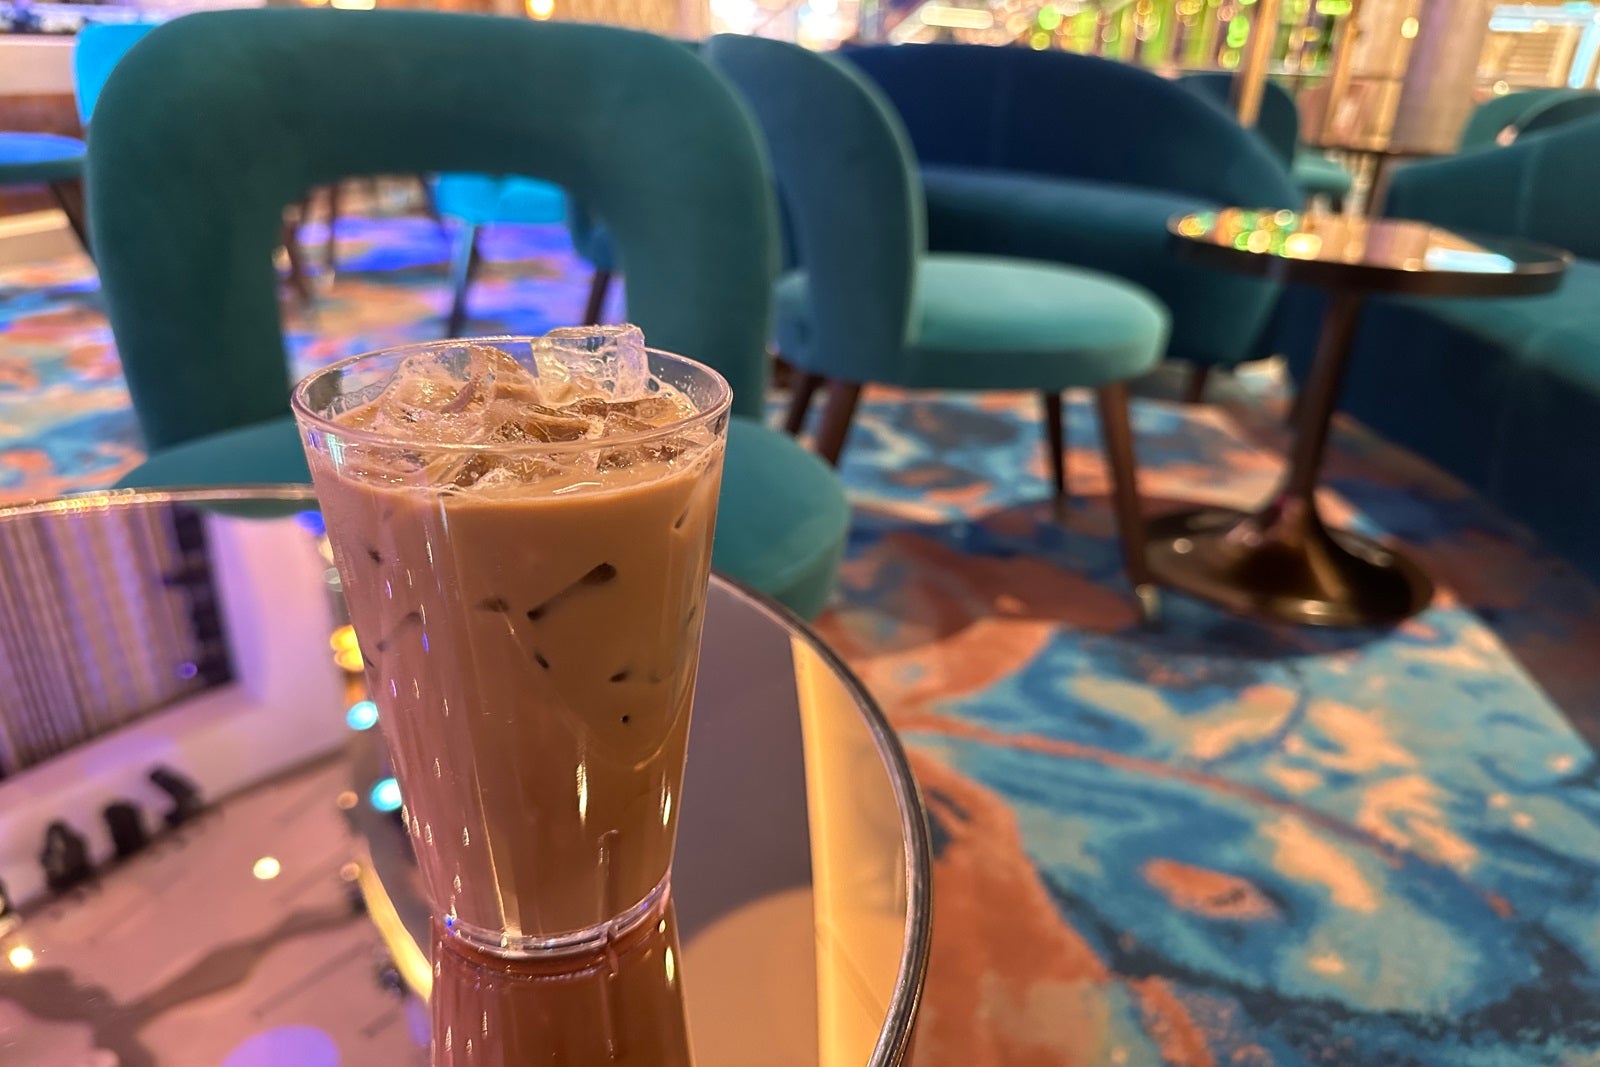 An iced coffee in a glass sitting on a table with teal chairs in the background